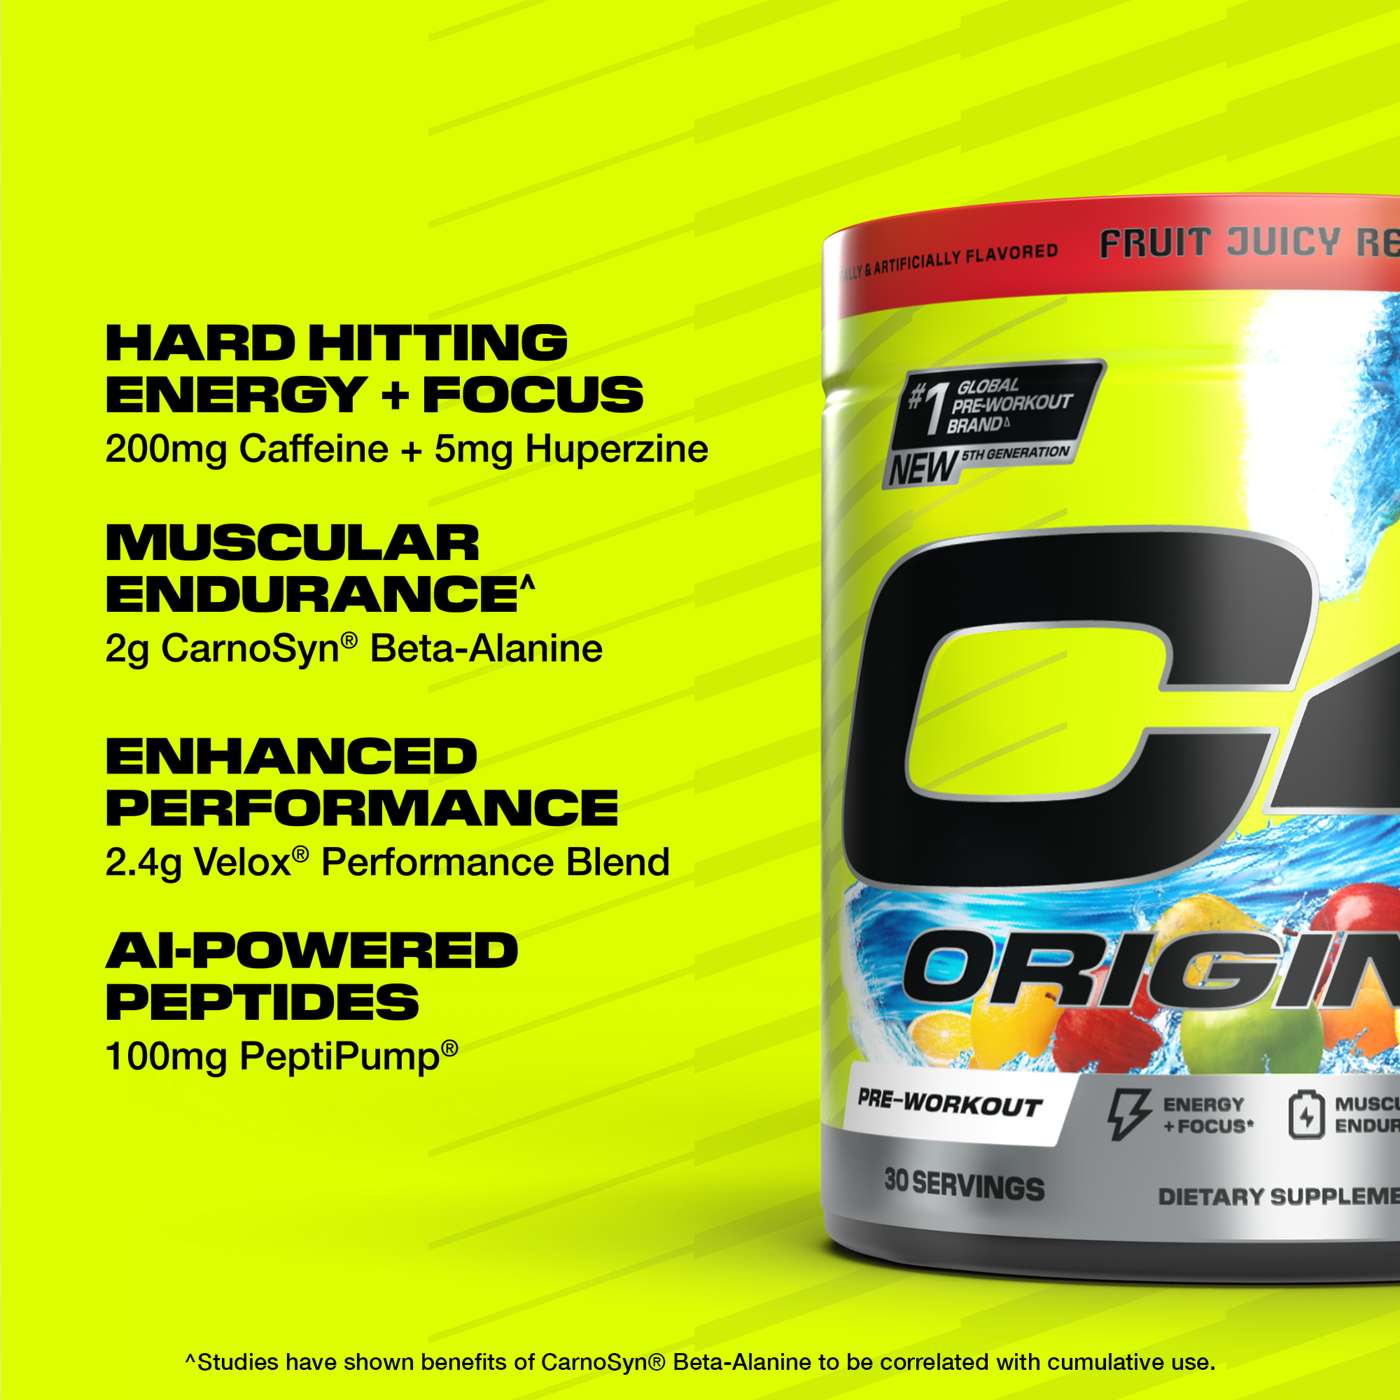 Cellucor C4 Original Pre-Workout - Hawaiian Punch Fruit Juicy Red; image 2 of 6